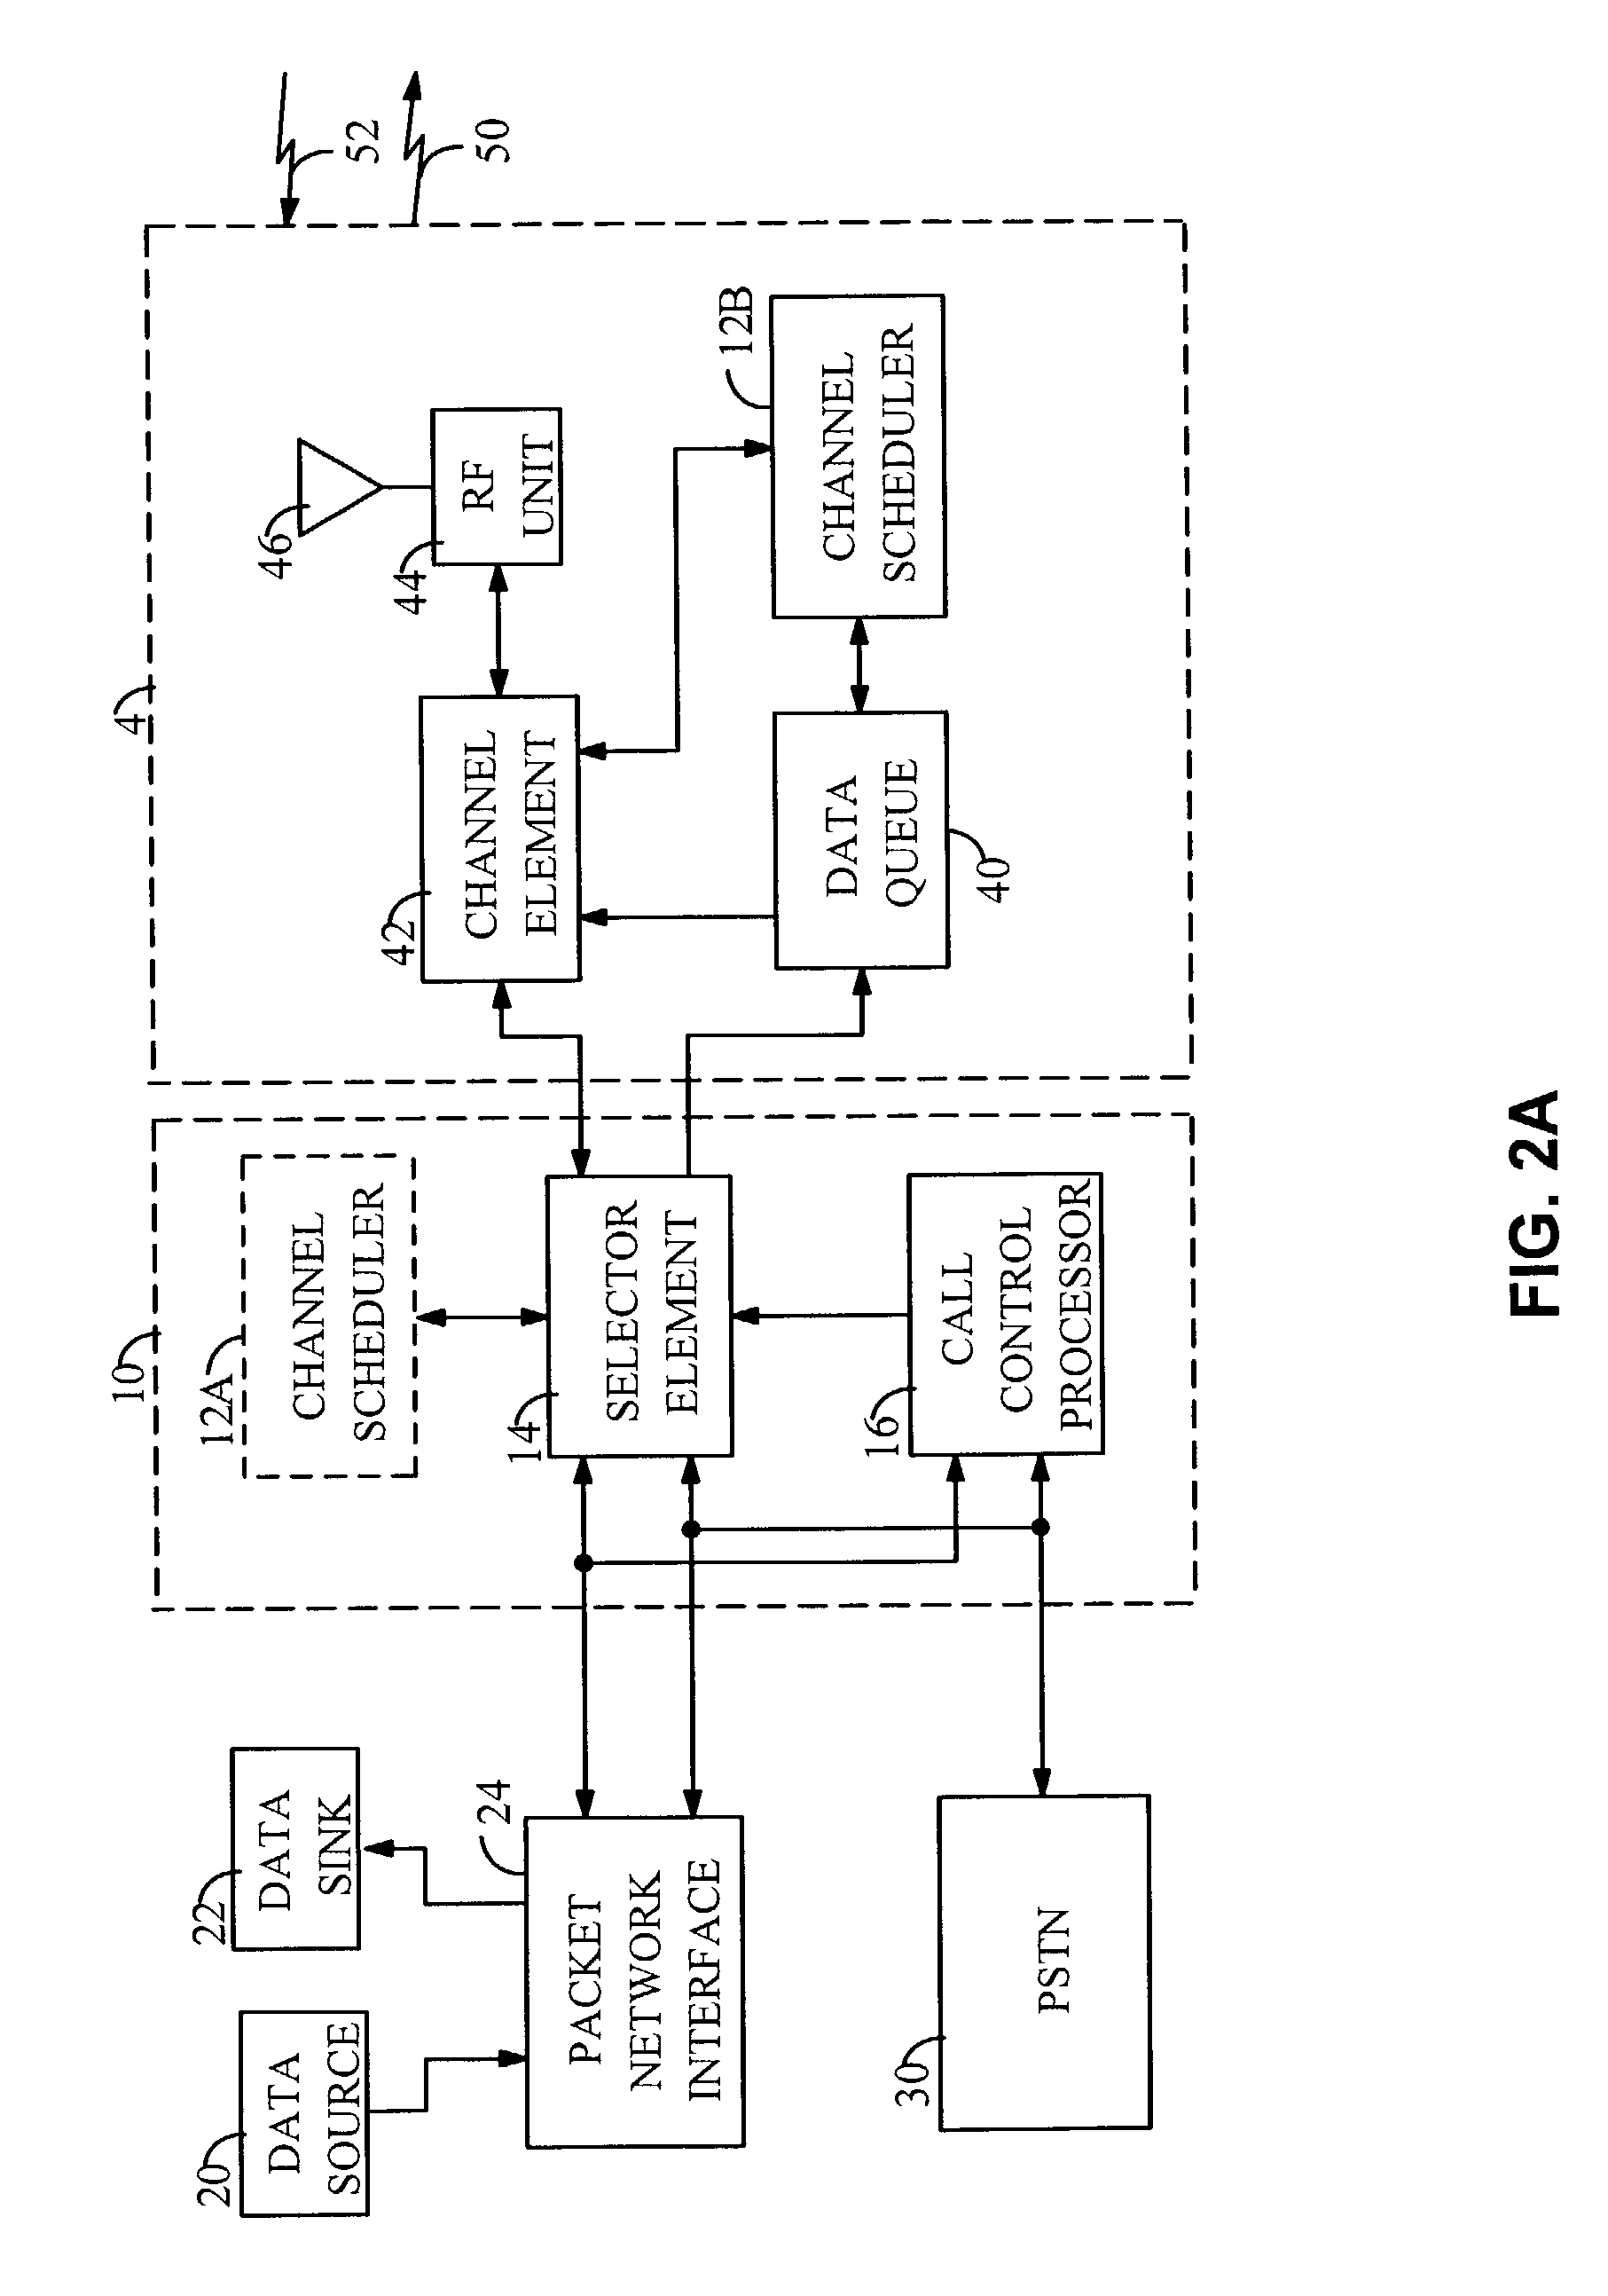 Resource allocation in a communication system supporting application flows having quality of service requirements